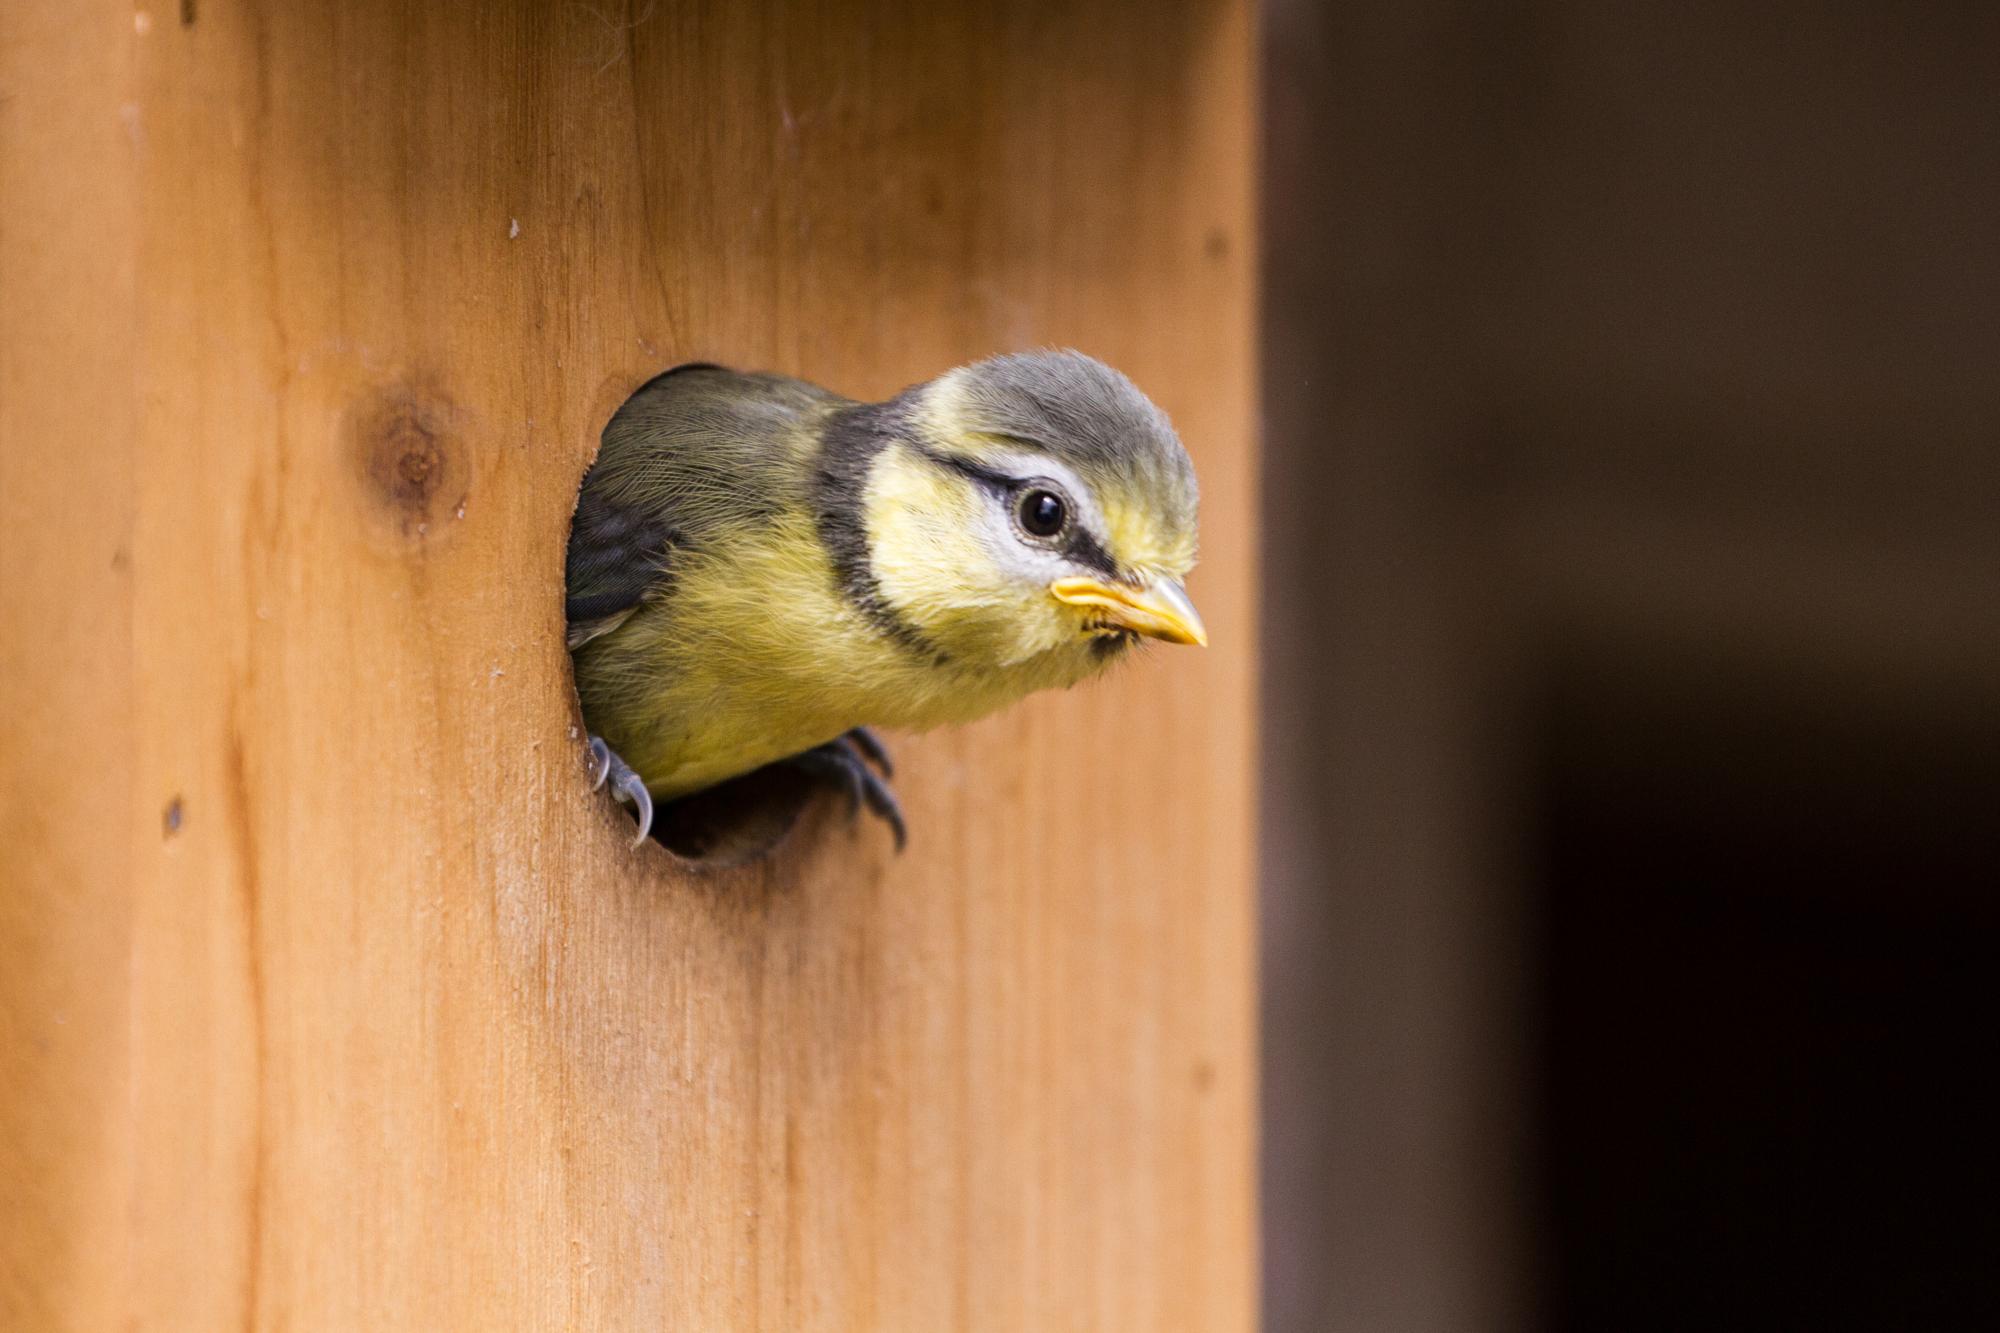 blue tit fledgling leaving bird box Adobe Stock for Make Space For Nature campaign